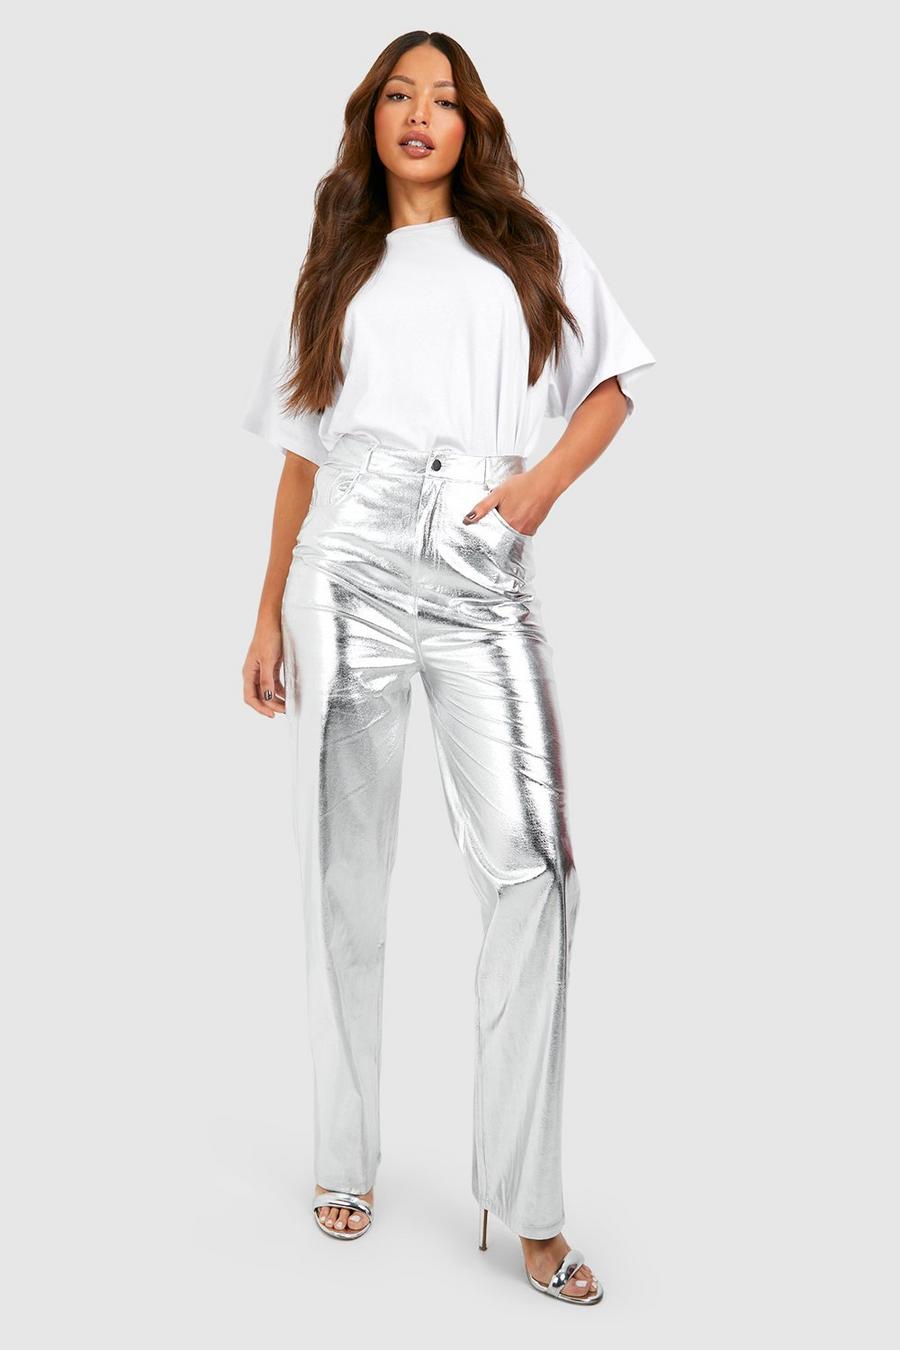 Silver Tall Metallic Leather Look High Waisted Straight Pants